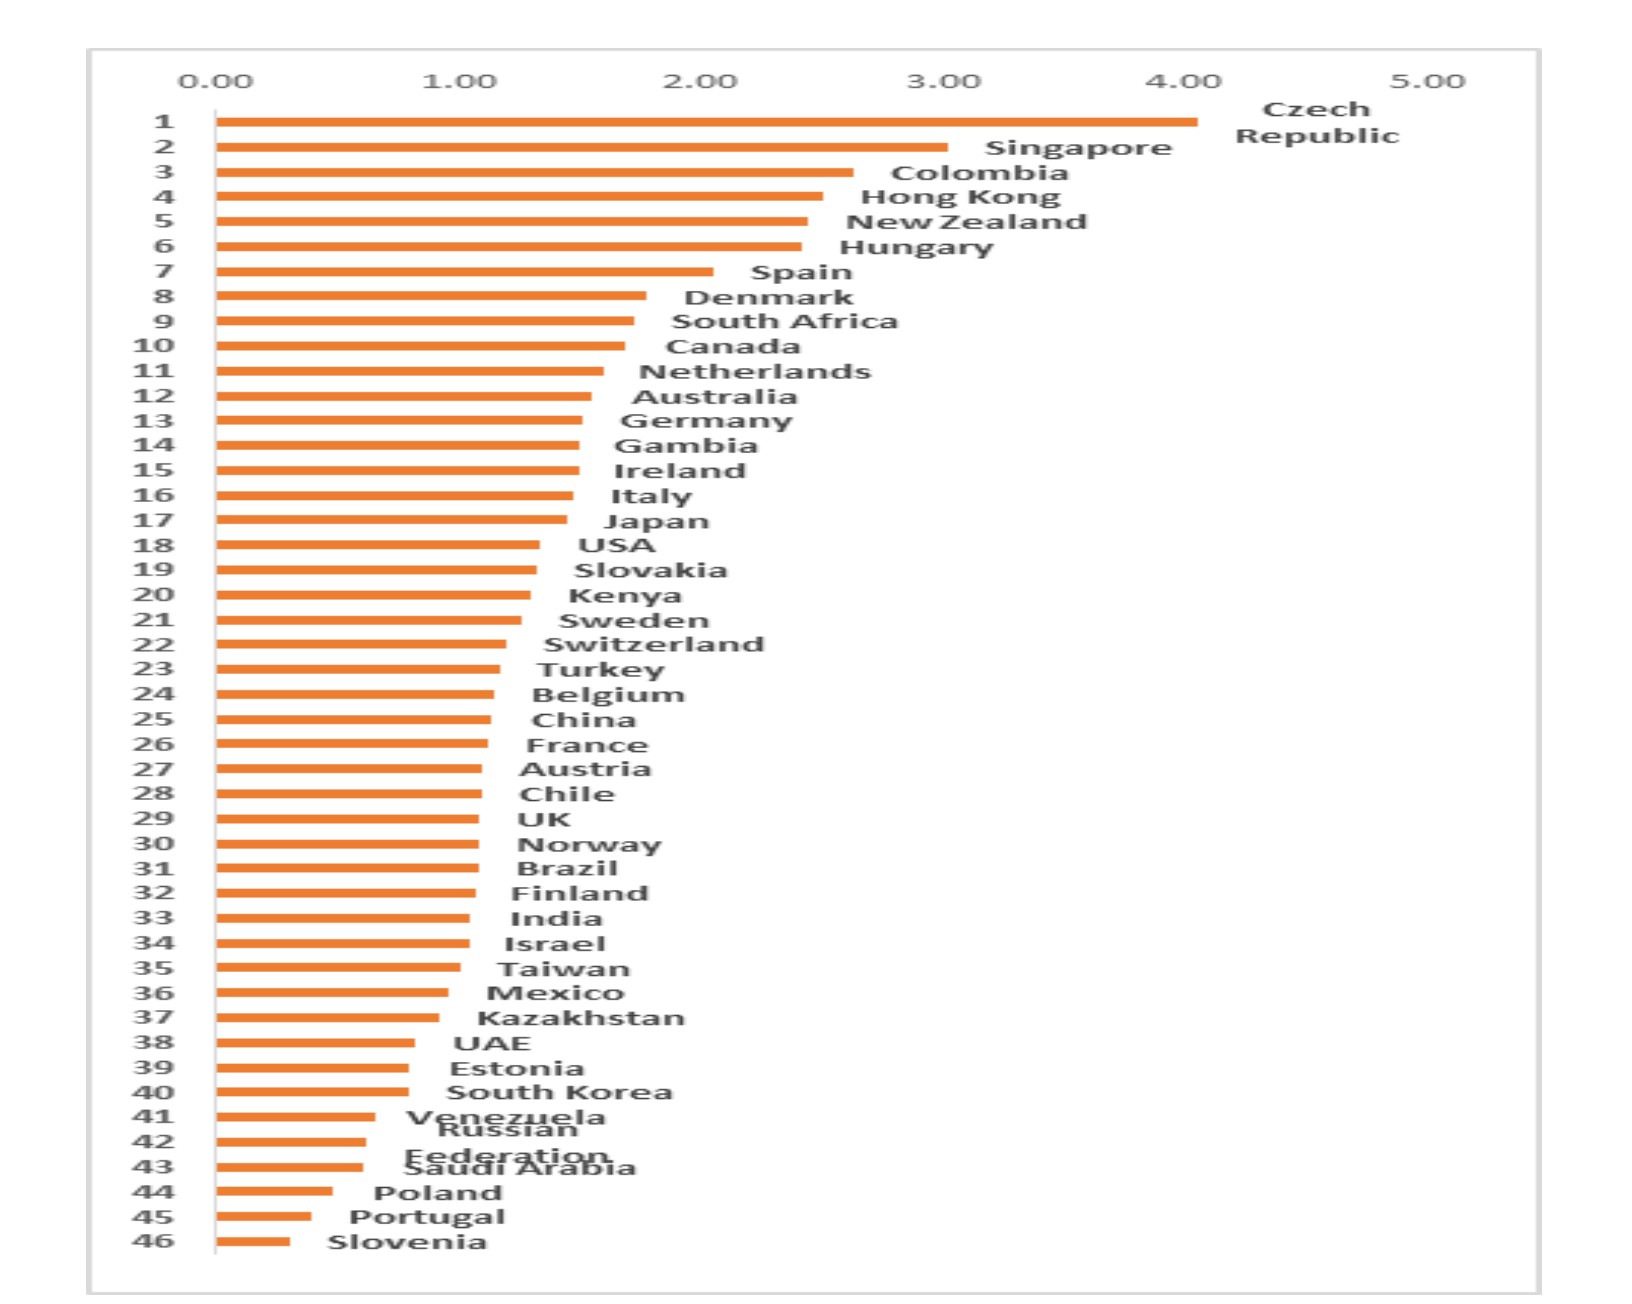 Appendix 6. The countries' relative citation cost-effectiveness means in 2014